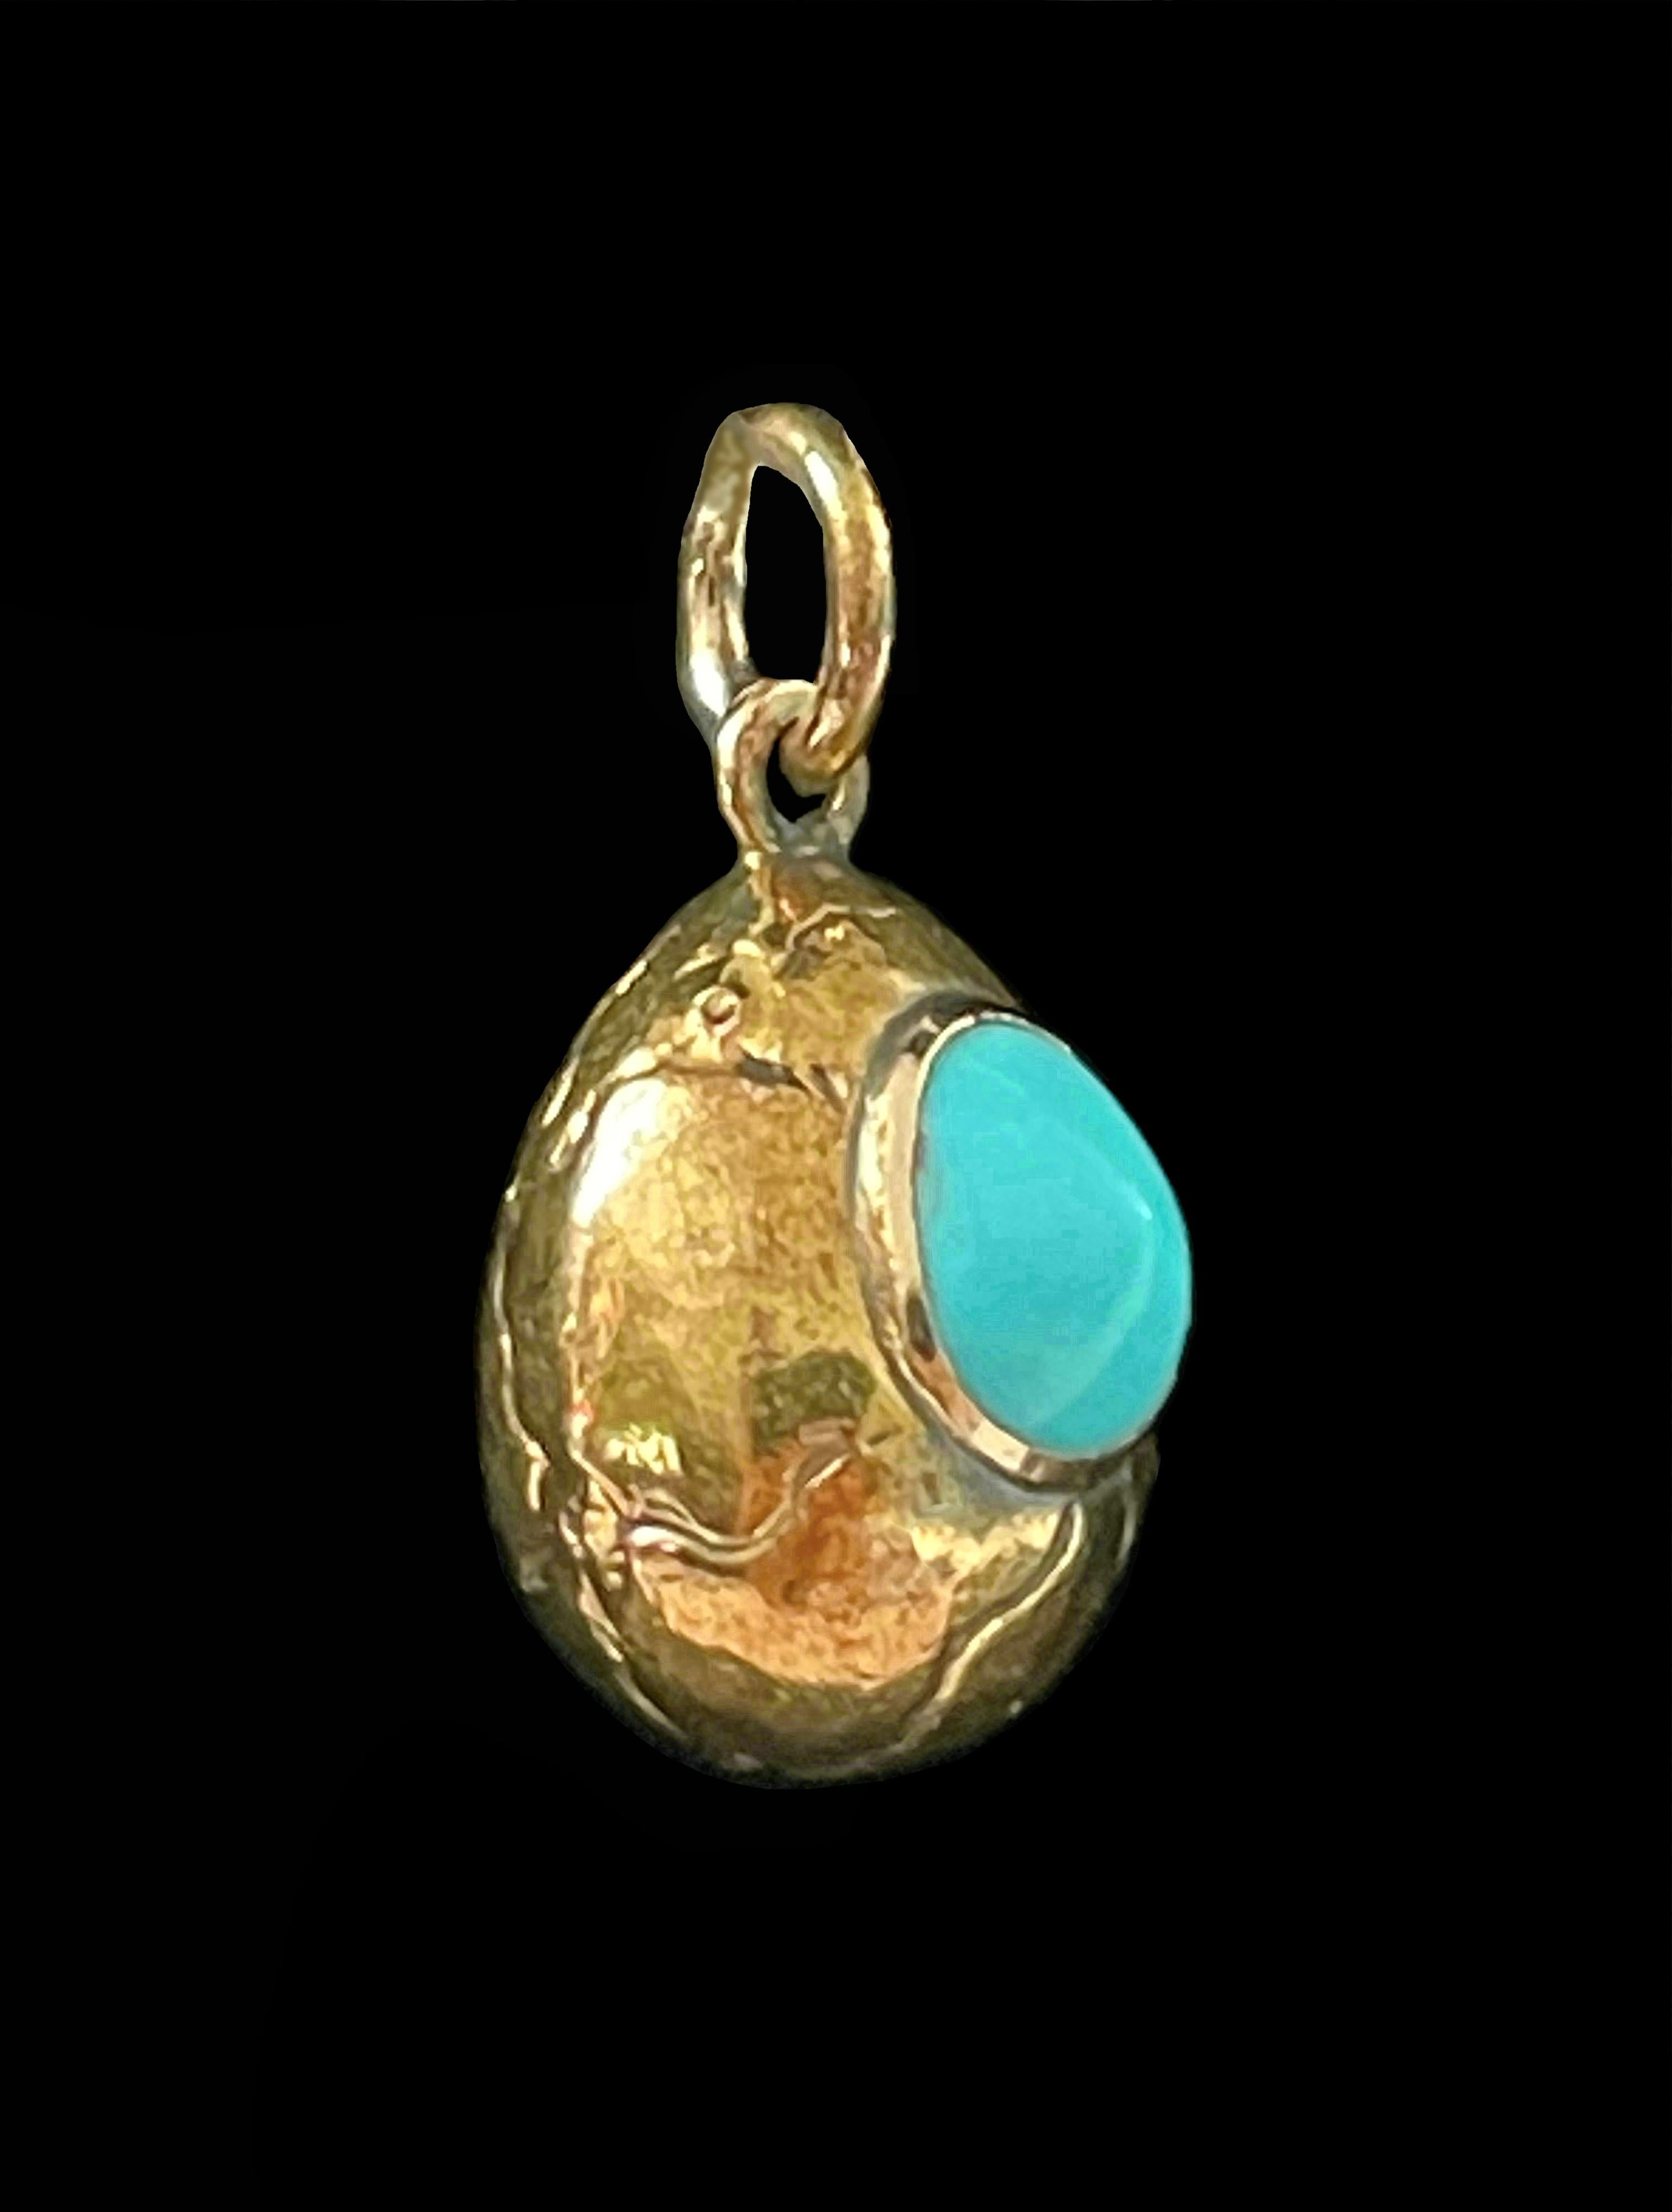 Antique 14K Yellow Gold & Persian Turquoise Egg Pendant - Early 20th Century In Good Condition For Sale In Chatham, CA